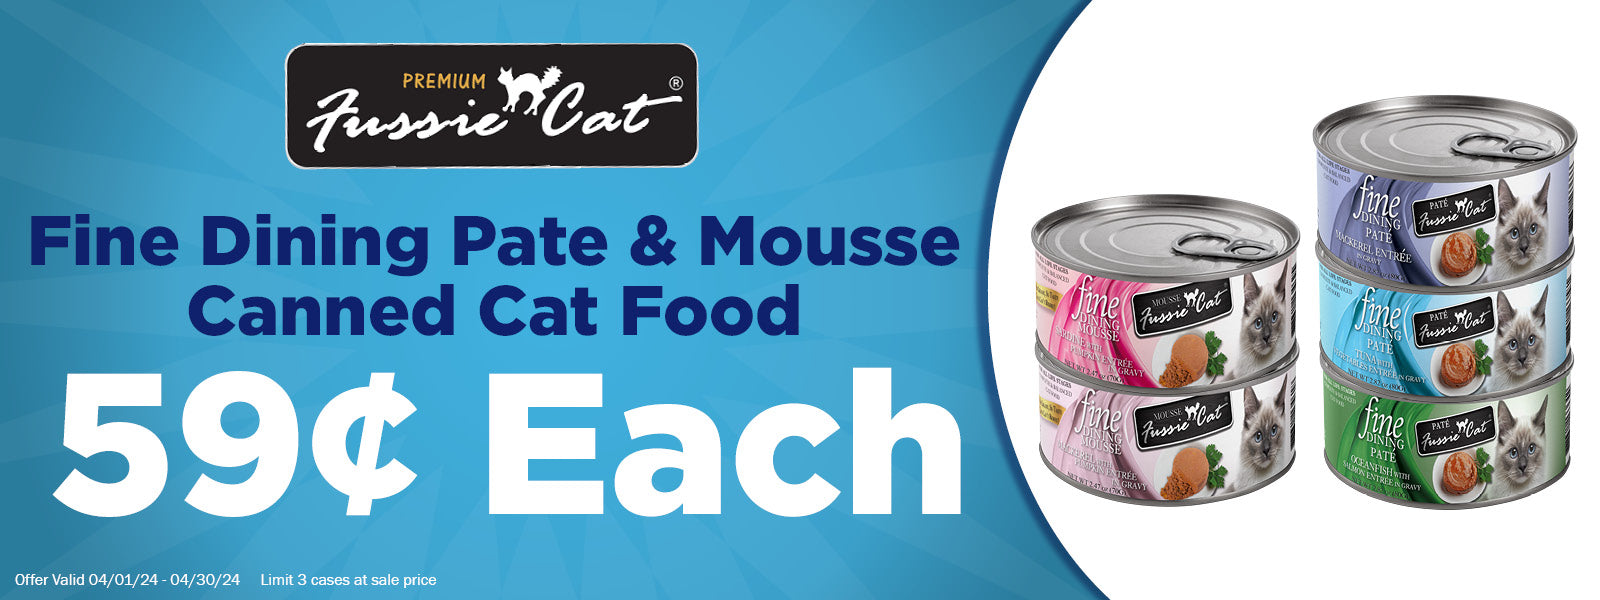 Fussie Cat Fine Dining Pate and Mousse Cans 59 Cents Each.